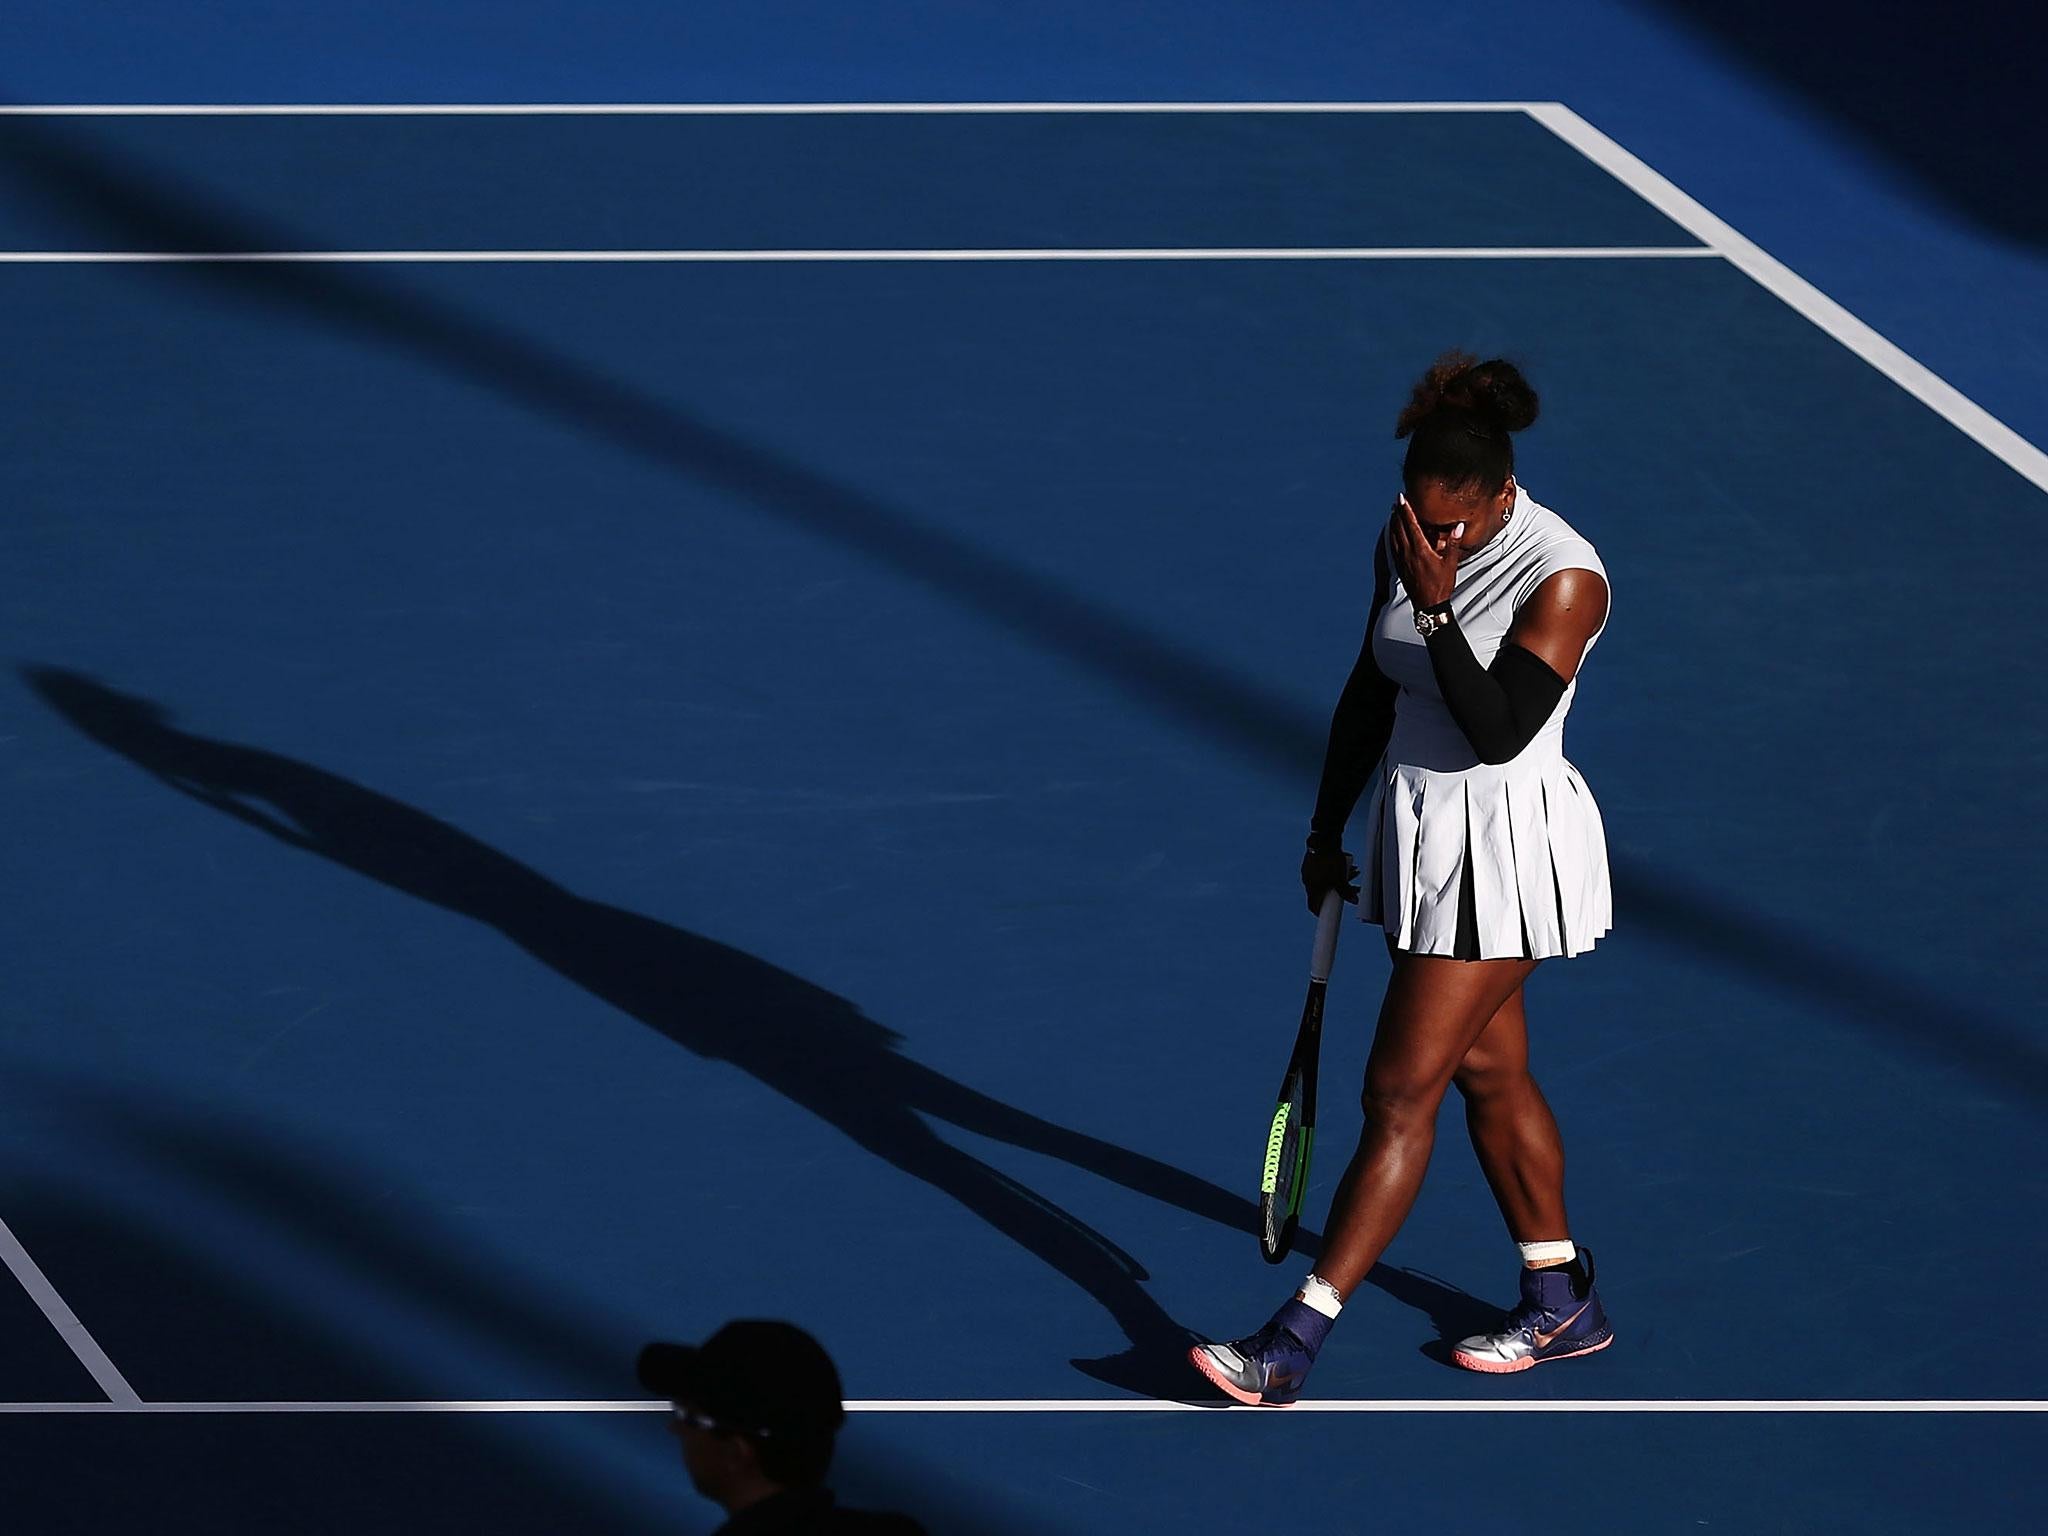 Williams made 88 unforced errors against her fellow American